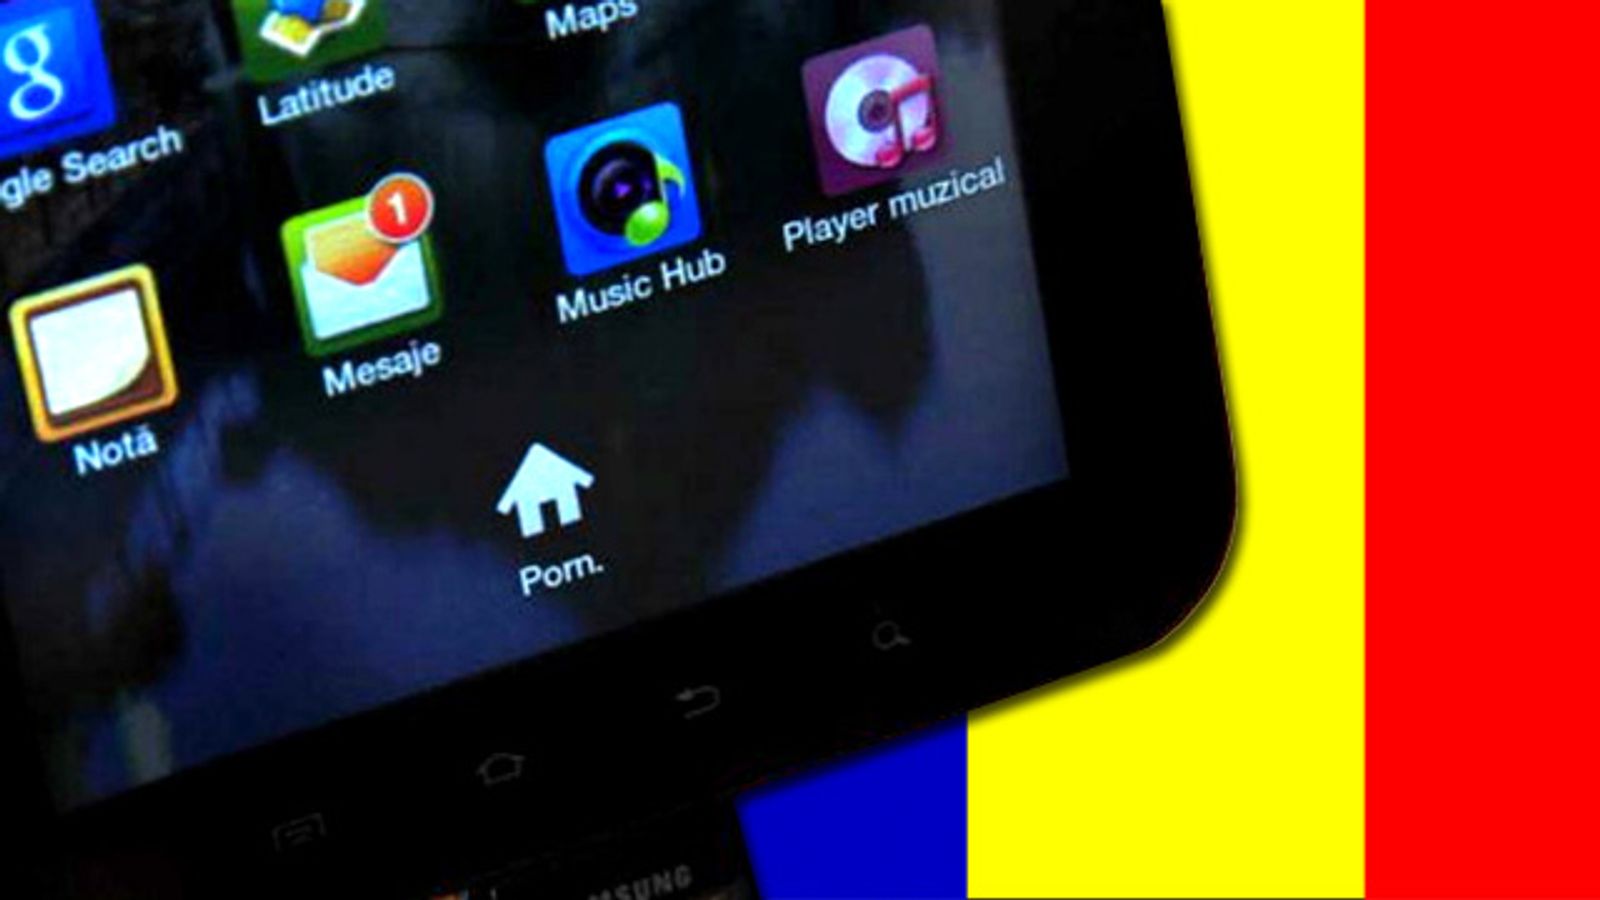 Romanian Android Phone Puts Porn. at Home